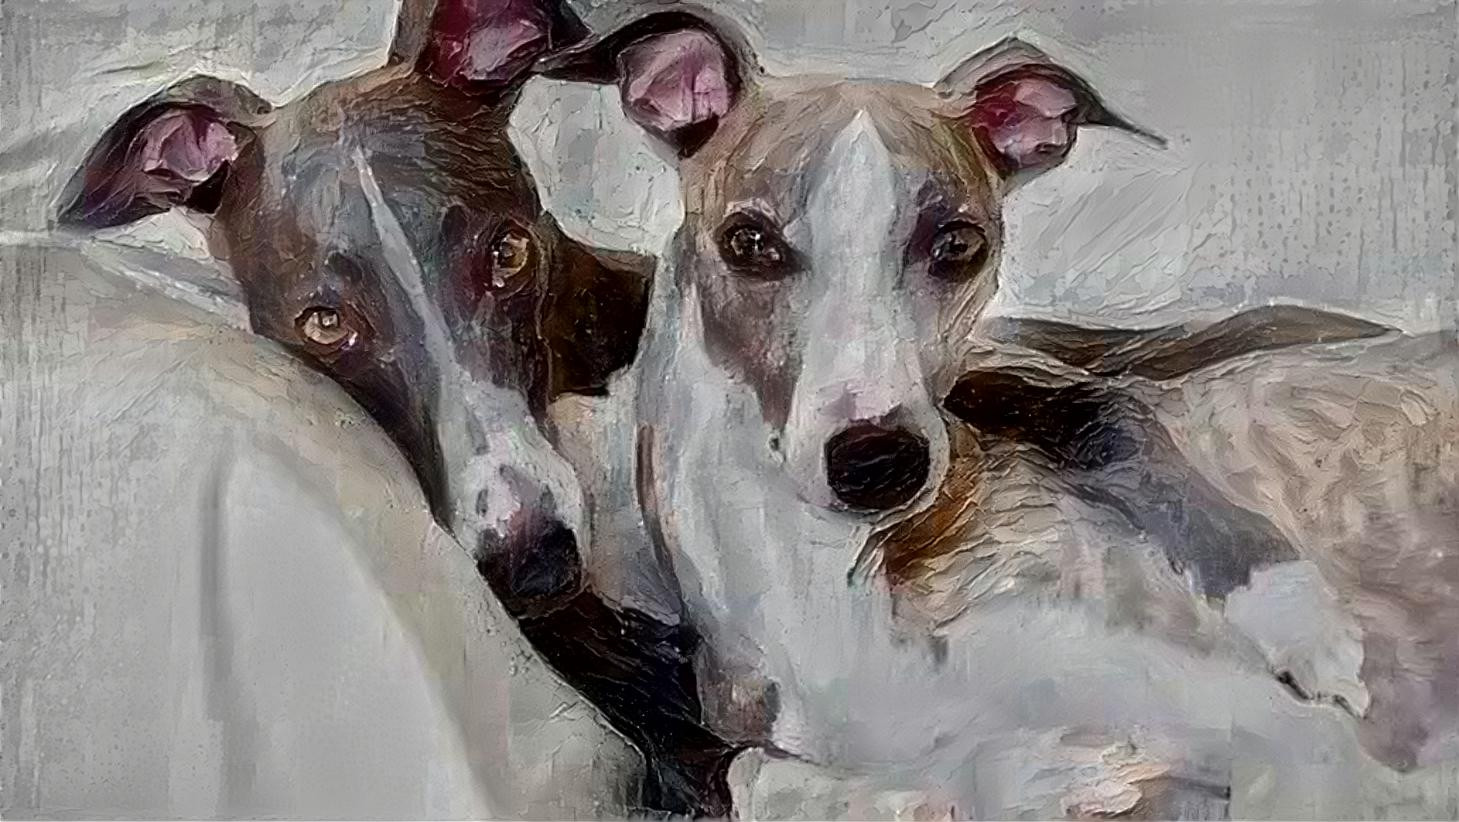 whippets